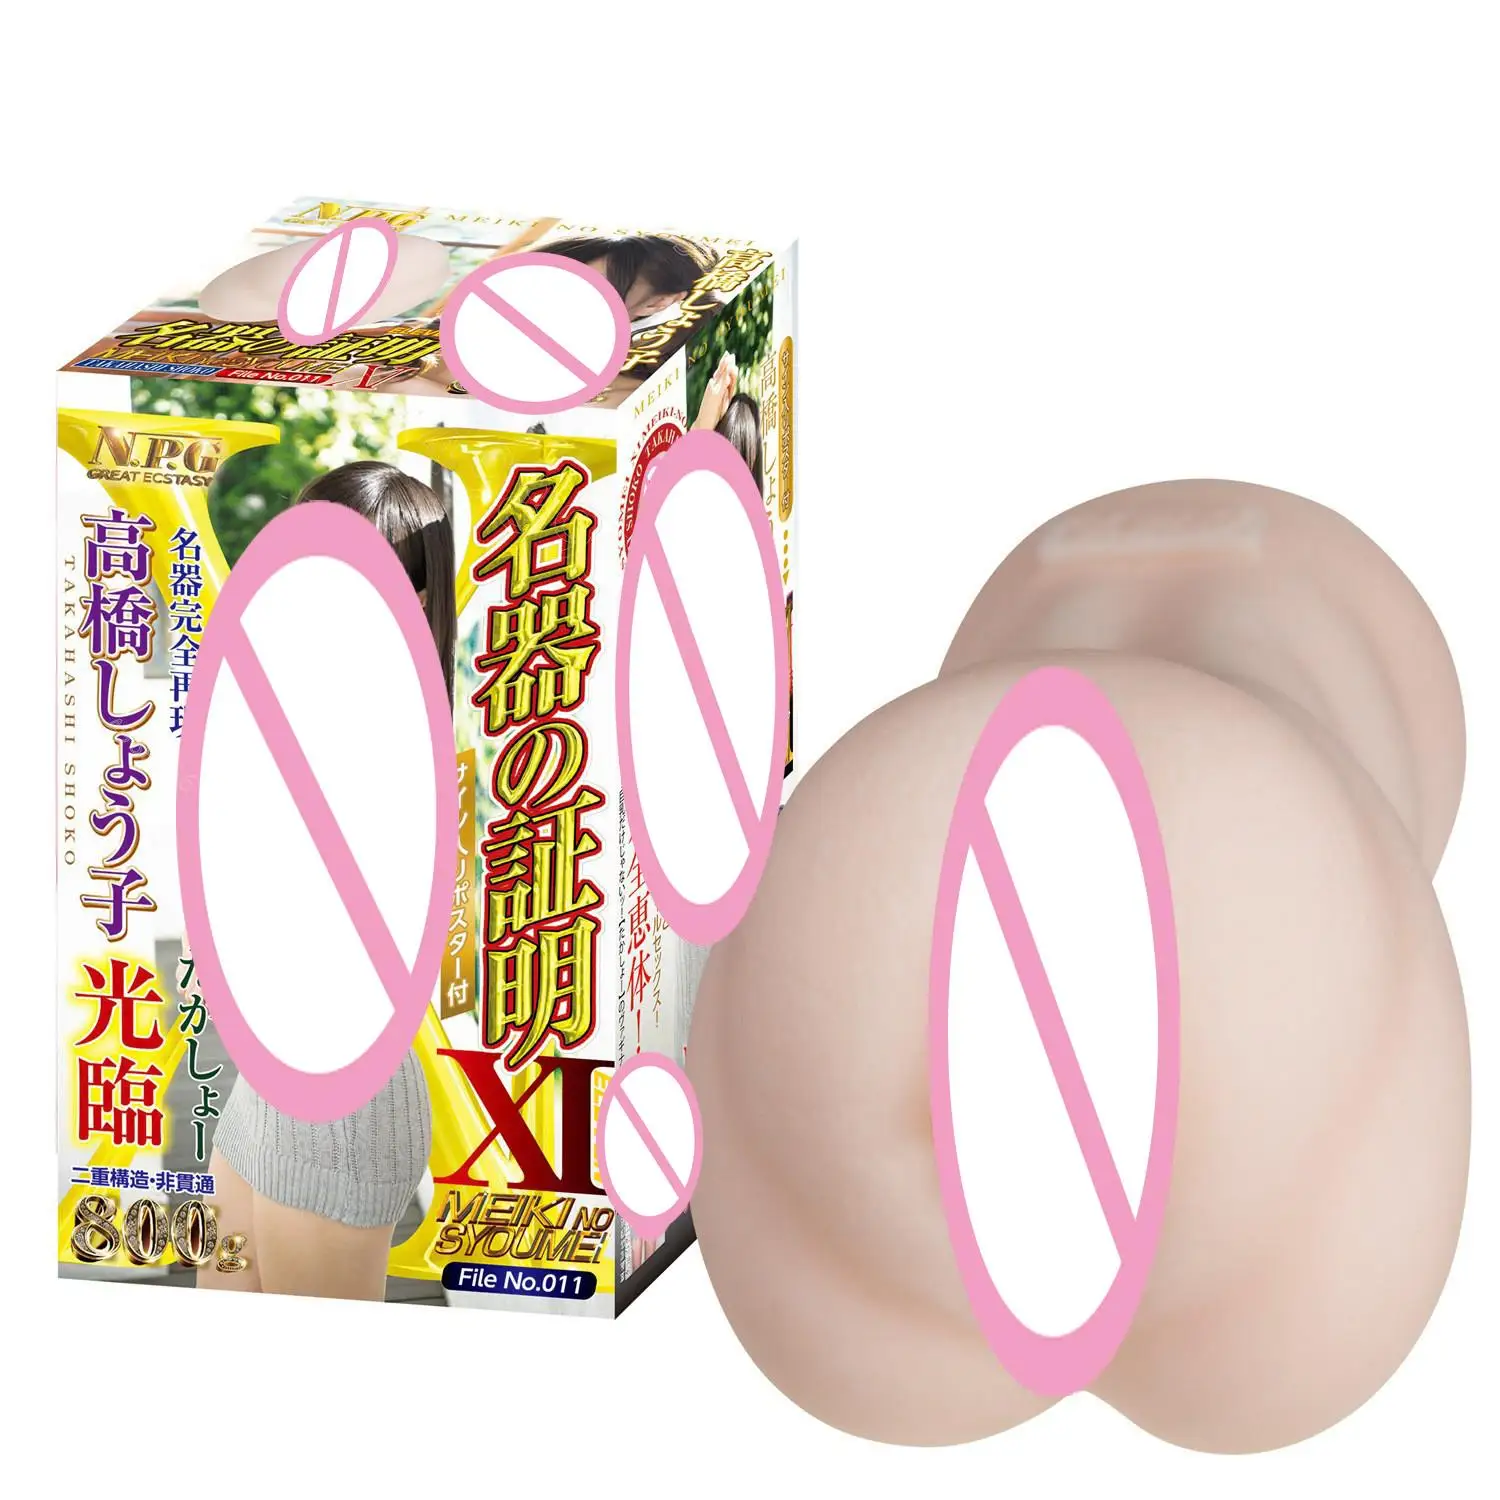 

Japan Imported NPG Artificial Vagina Realistic Pocket Pussy Onahole Male Masturbator Cup dildos No Syoumei 11 Sex Toys for Men